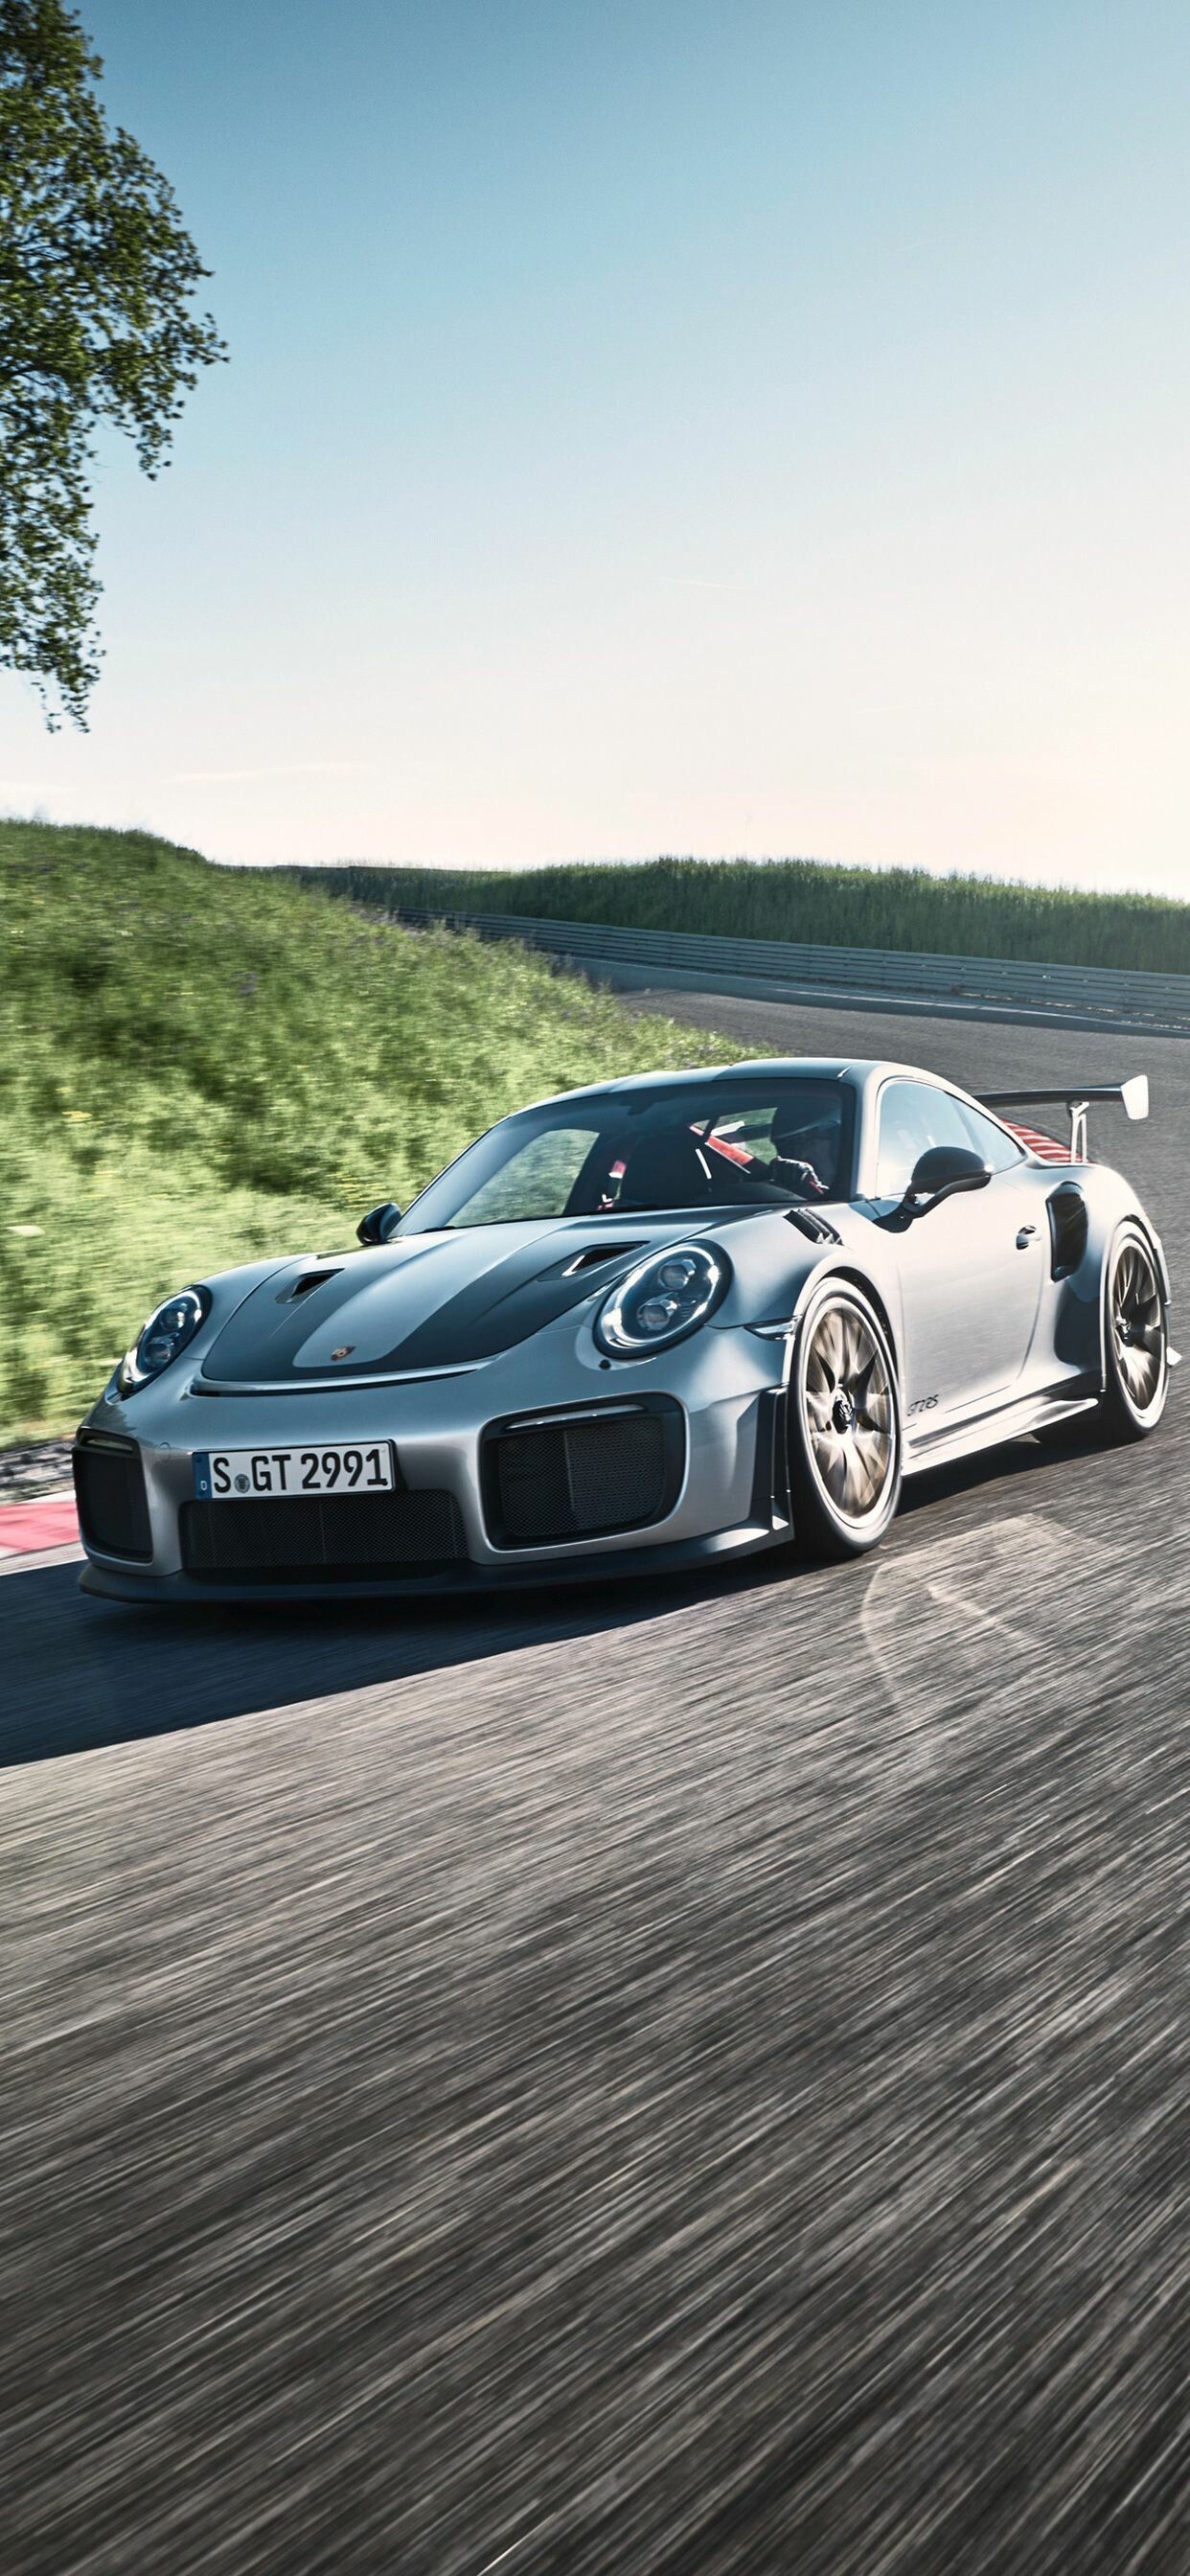 Porsche: Luxury carmaker with storied history, Sports car. 1250x2690 HD Background.